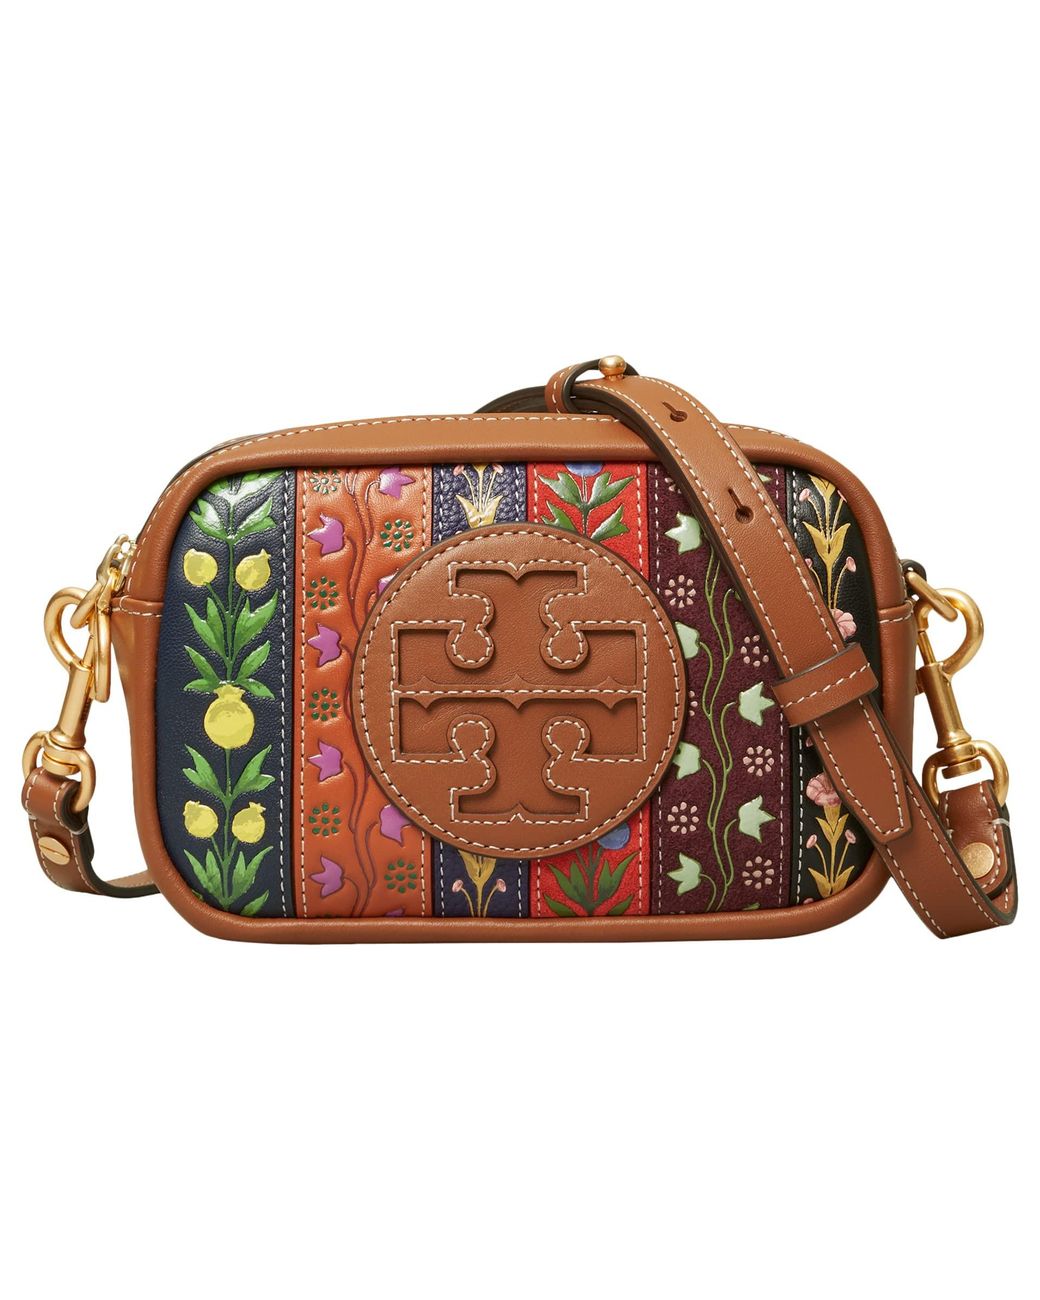 Tory Burch Leather Perry Bombe Ribbon Patchwork Mini Bag in Brown | Lyst